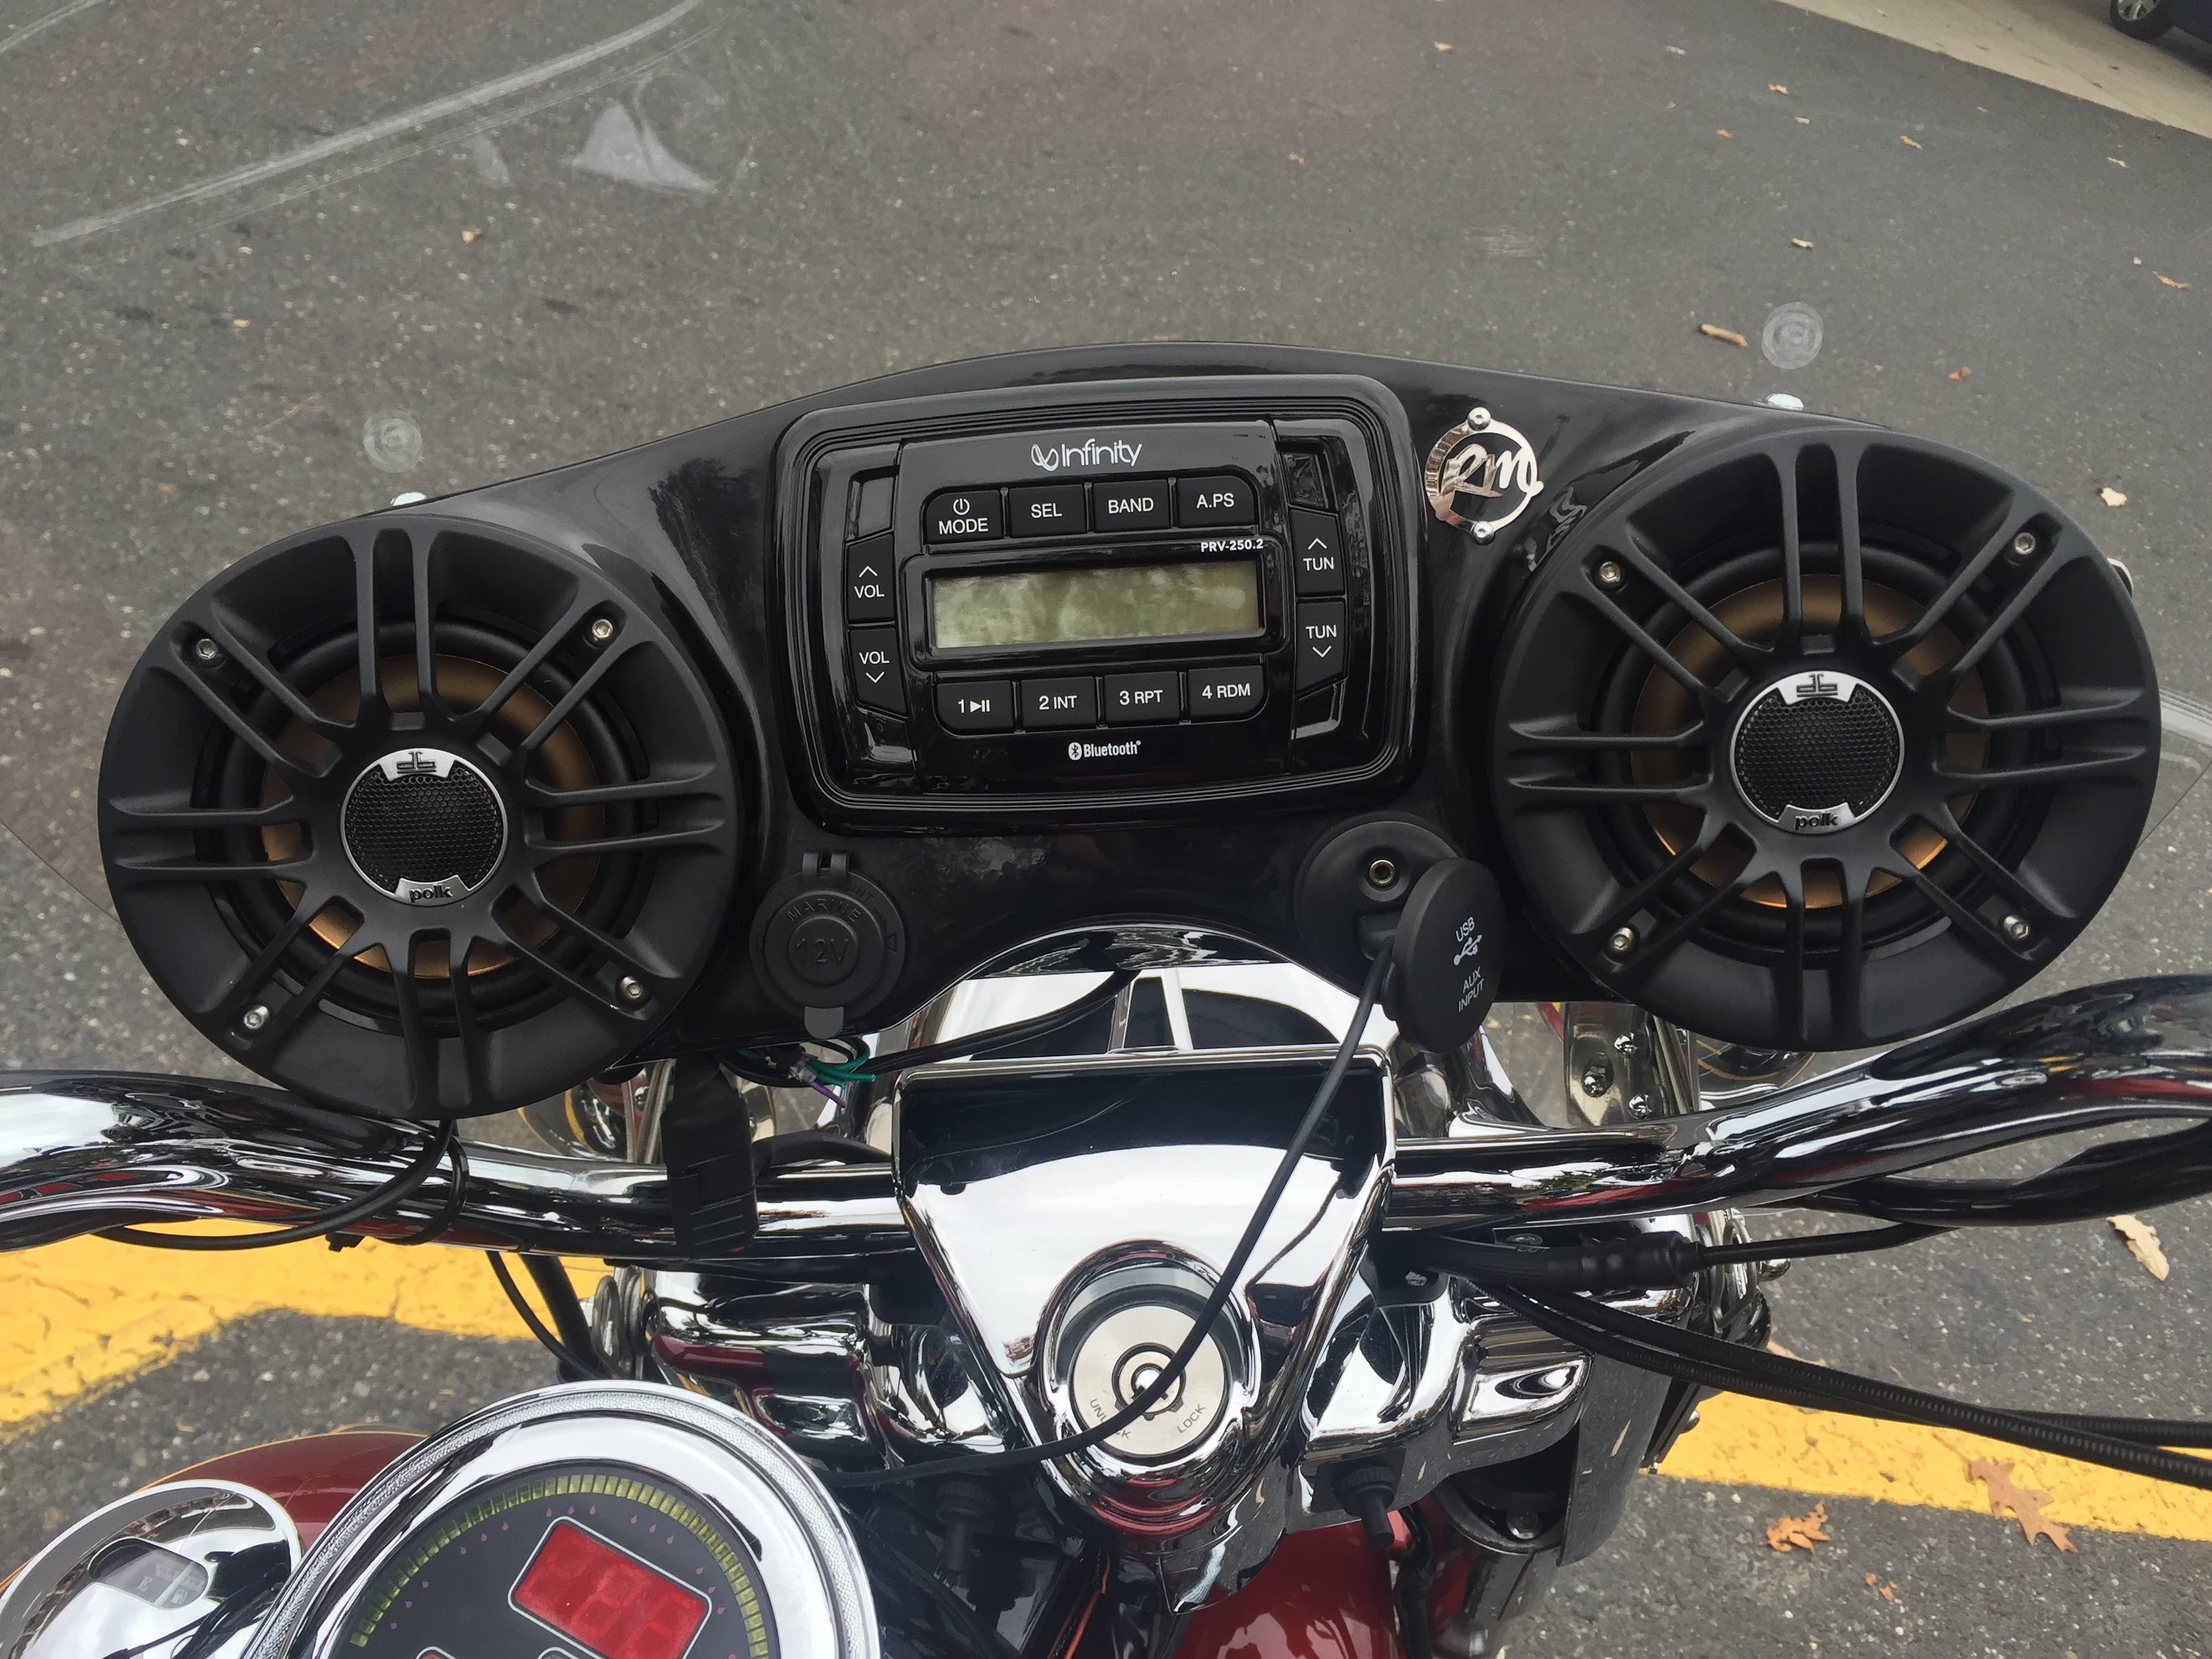 Review of the Reckless RockHoodz Windshield Mounted Stereo System 11/13